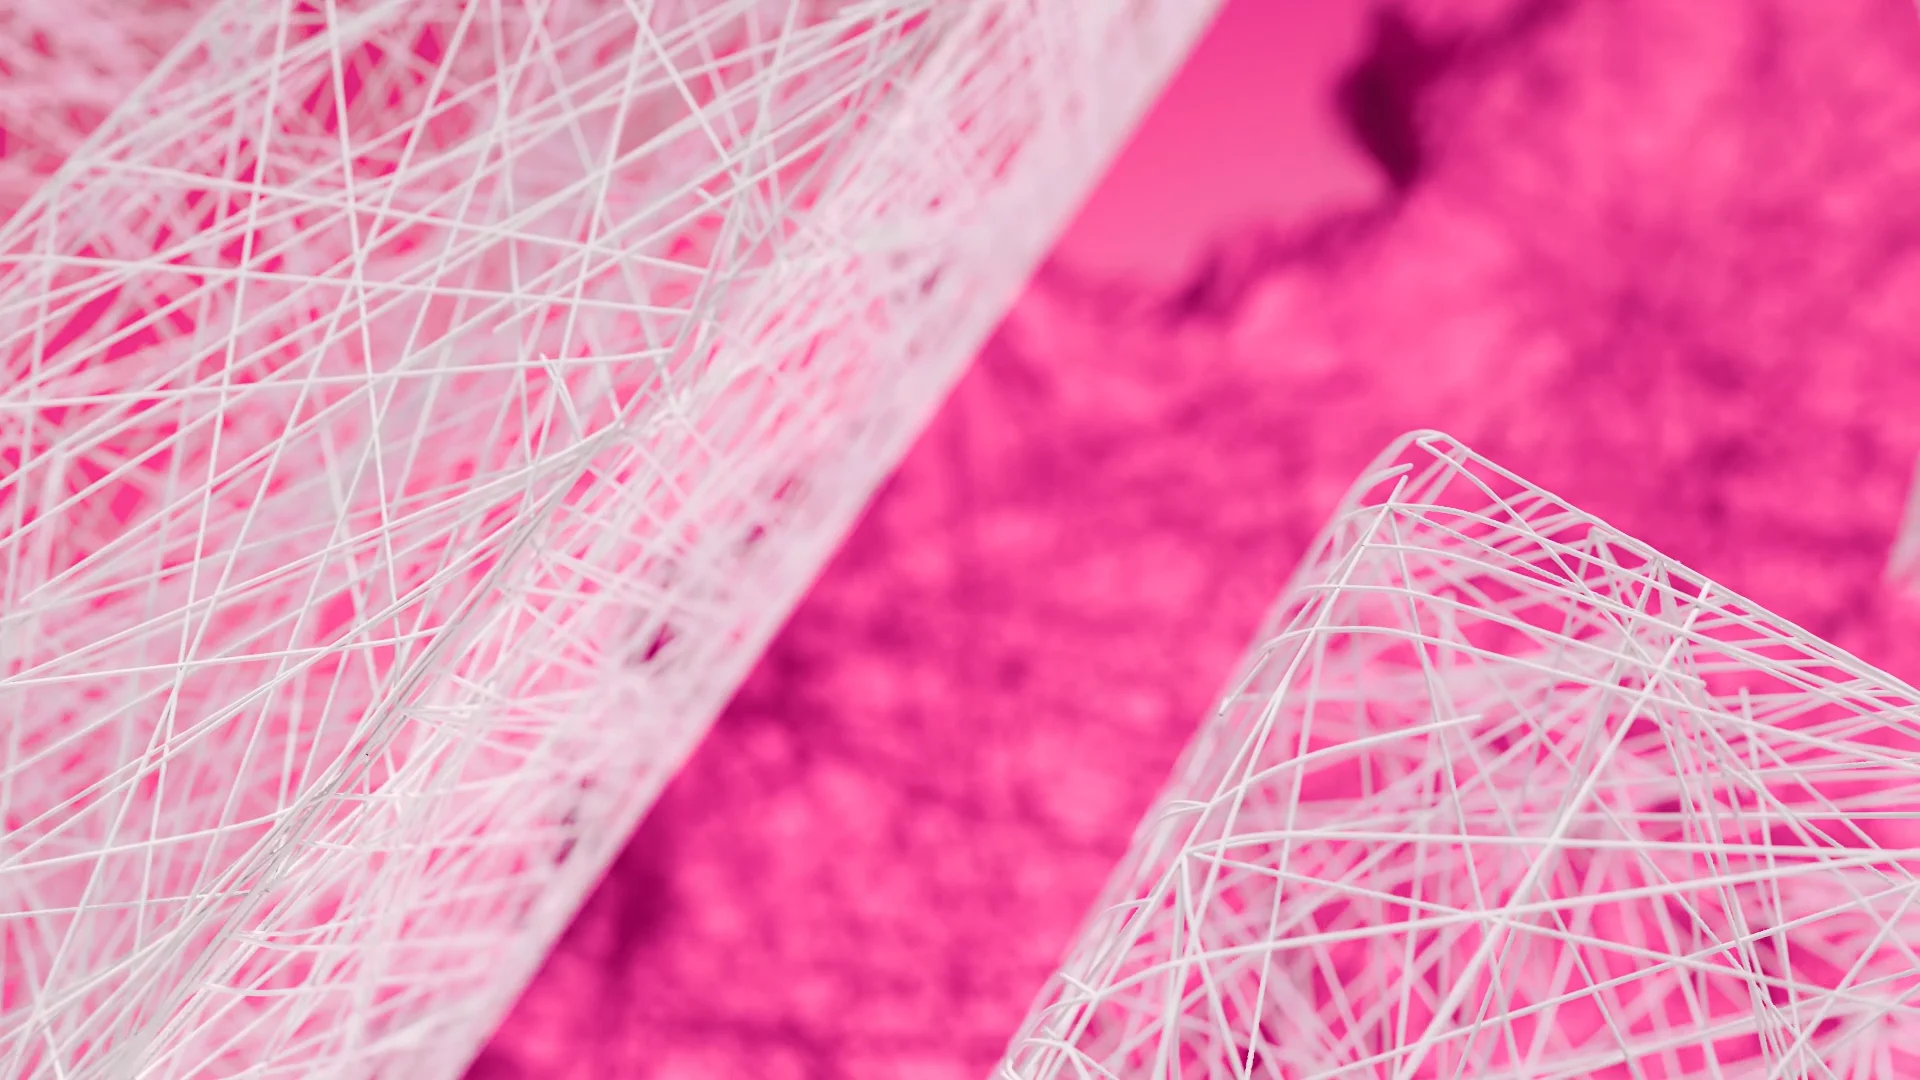 white threads forming objects in front of a magenta background